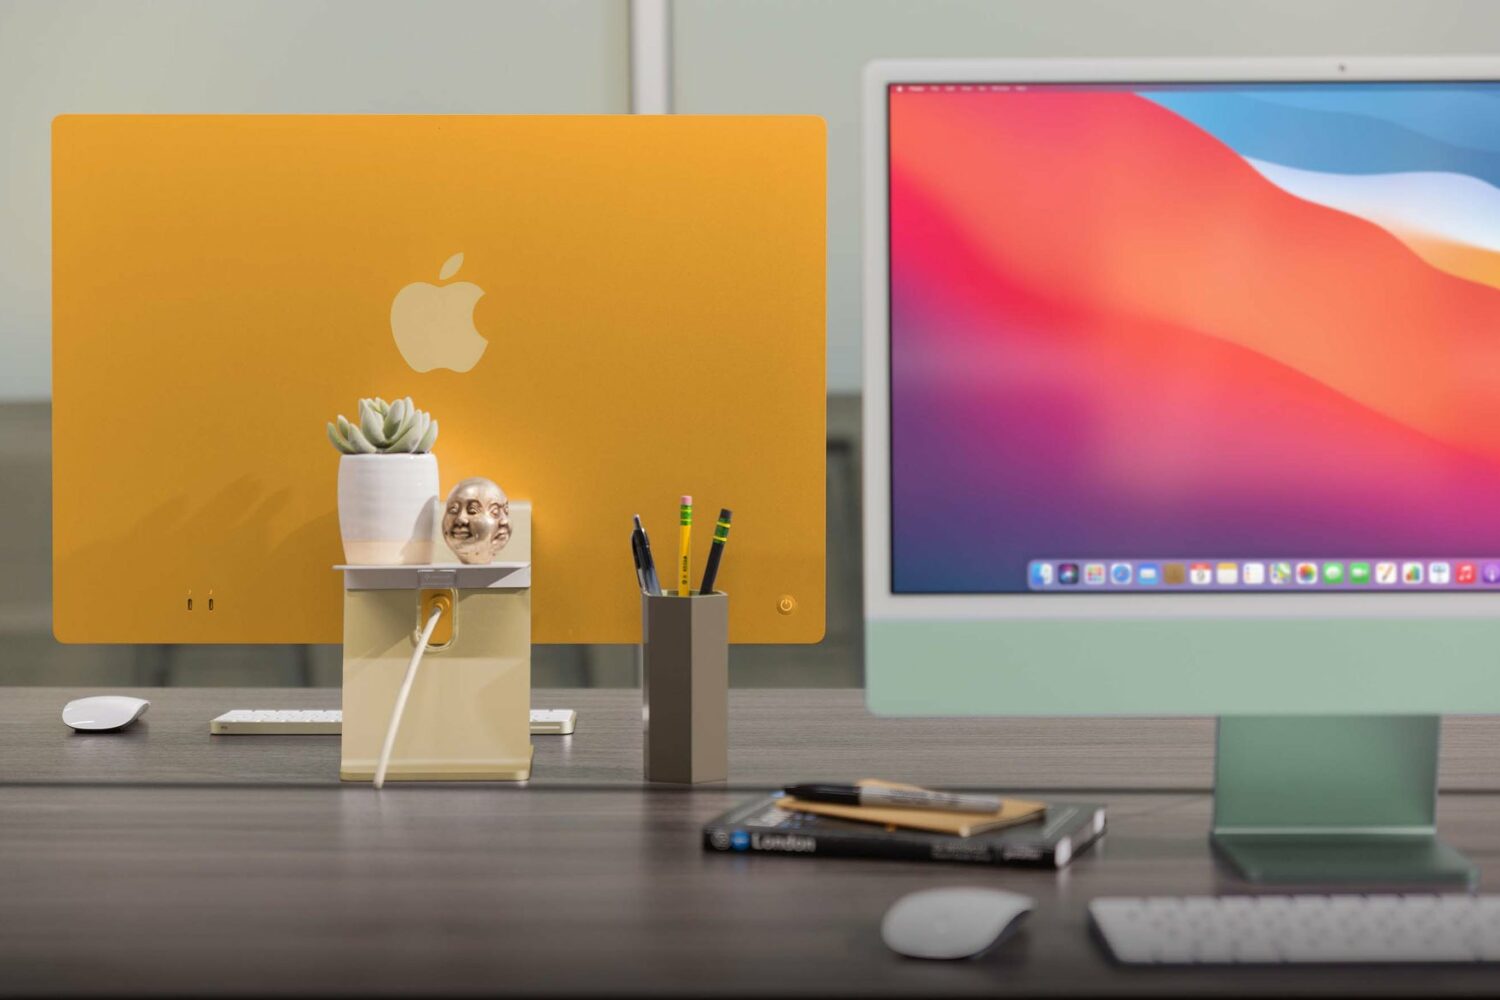 A promotional image from Twelve South showcasing its BackPack matte white aluminum shelf attached to the back of an orange 24-inch M1 iMac